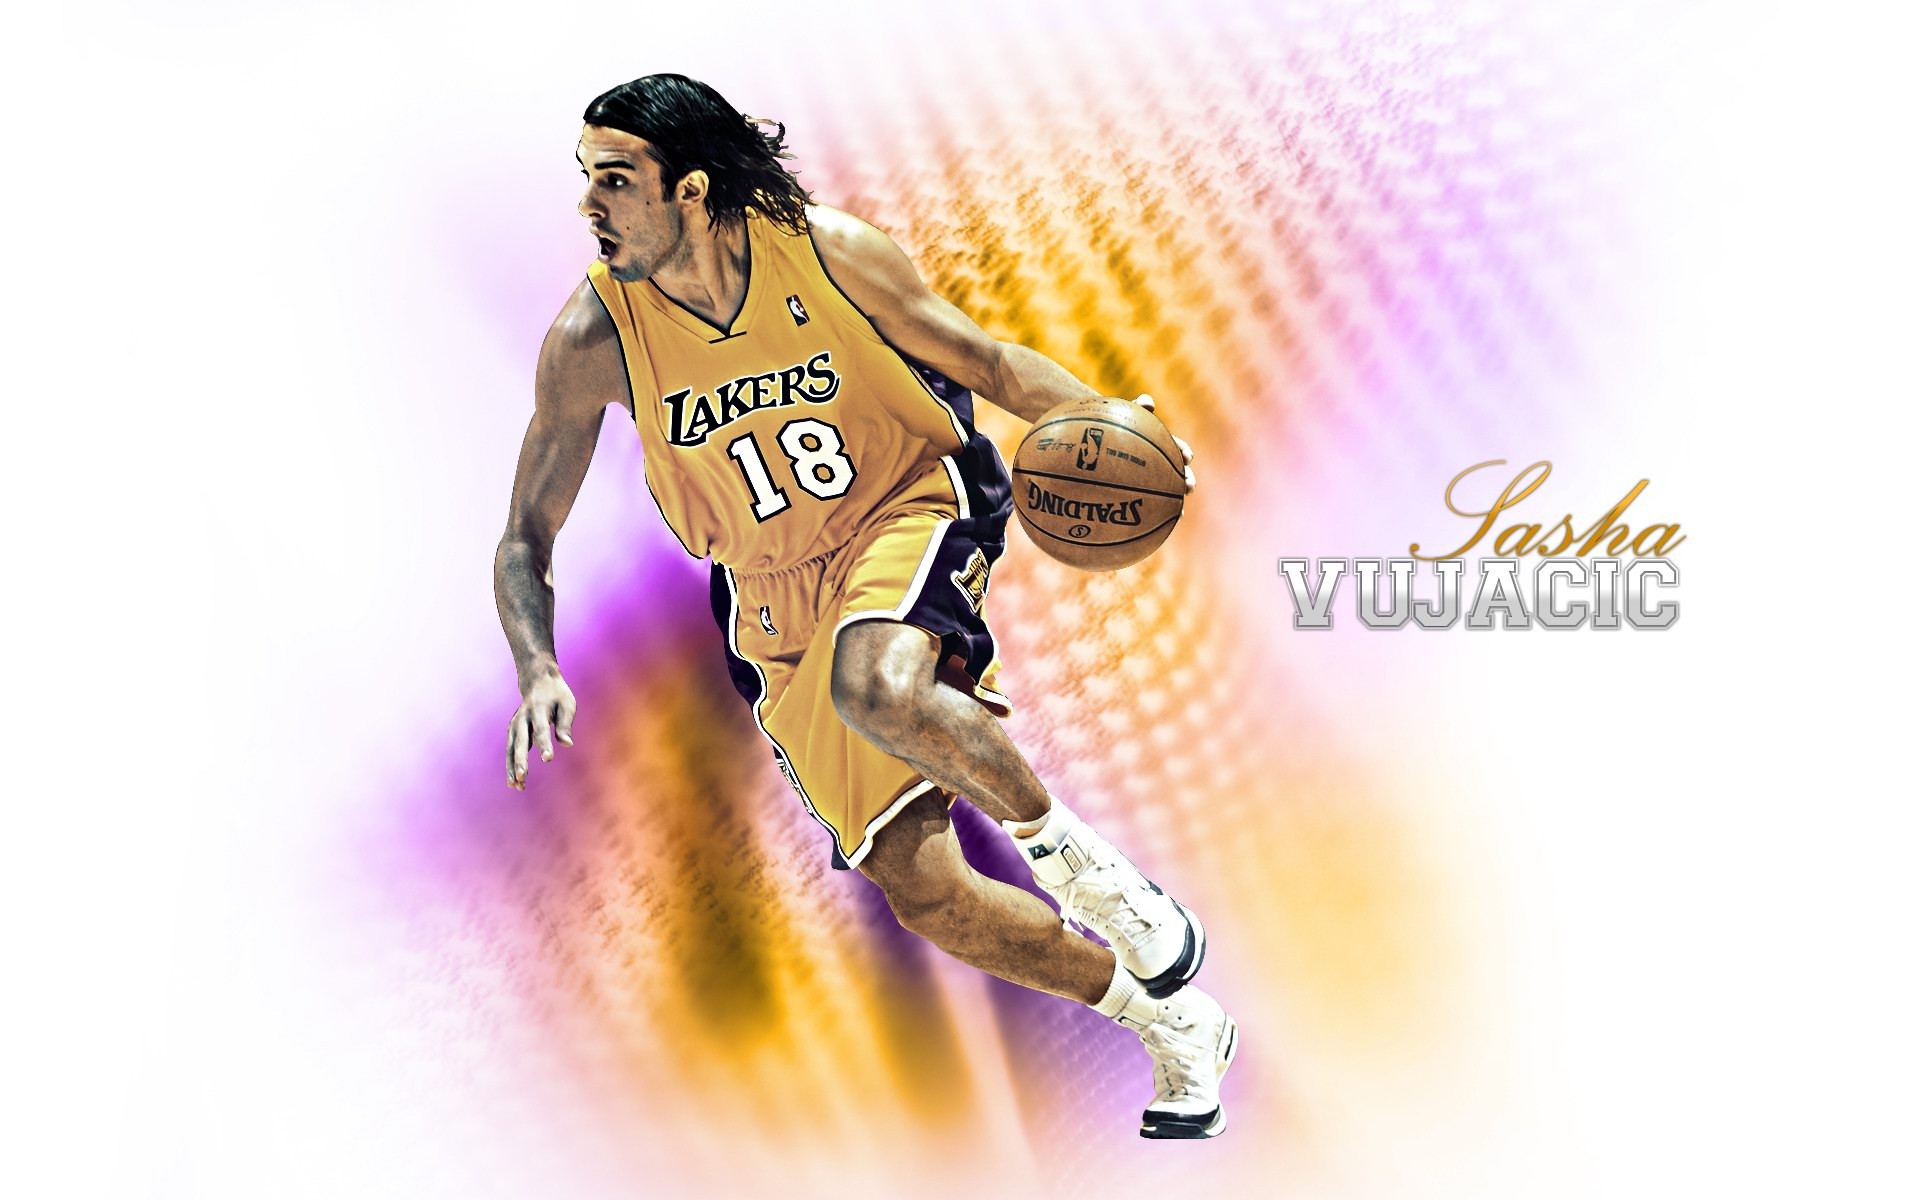 Los Angeles Lakers Wallpaper Oficial #23 - 1920x1200